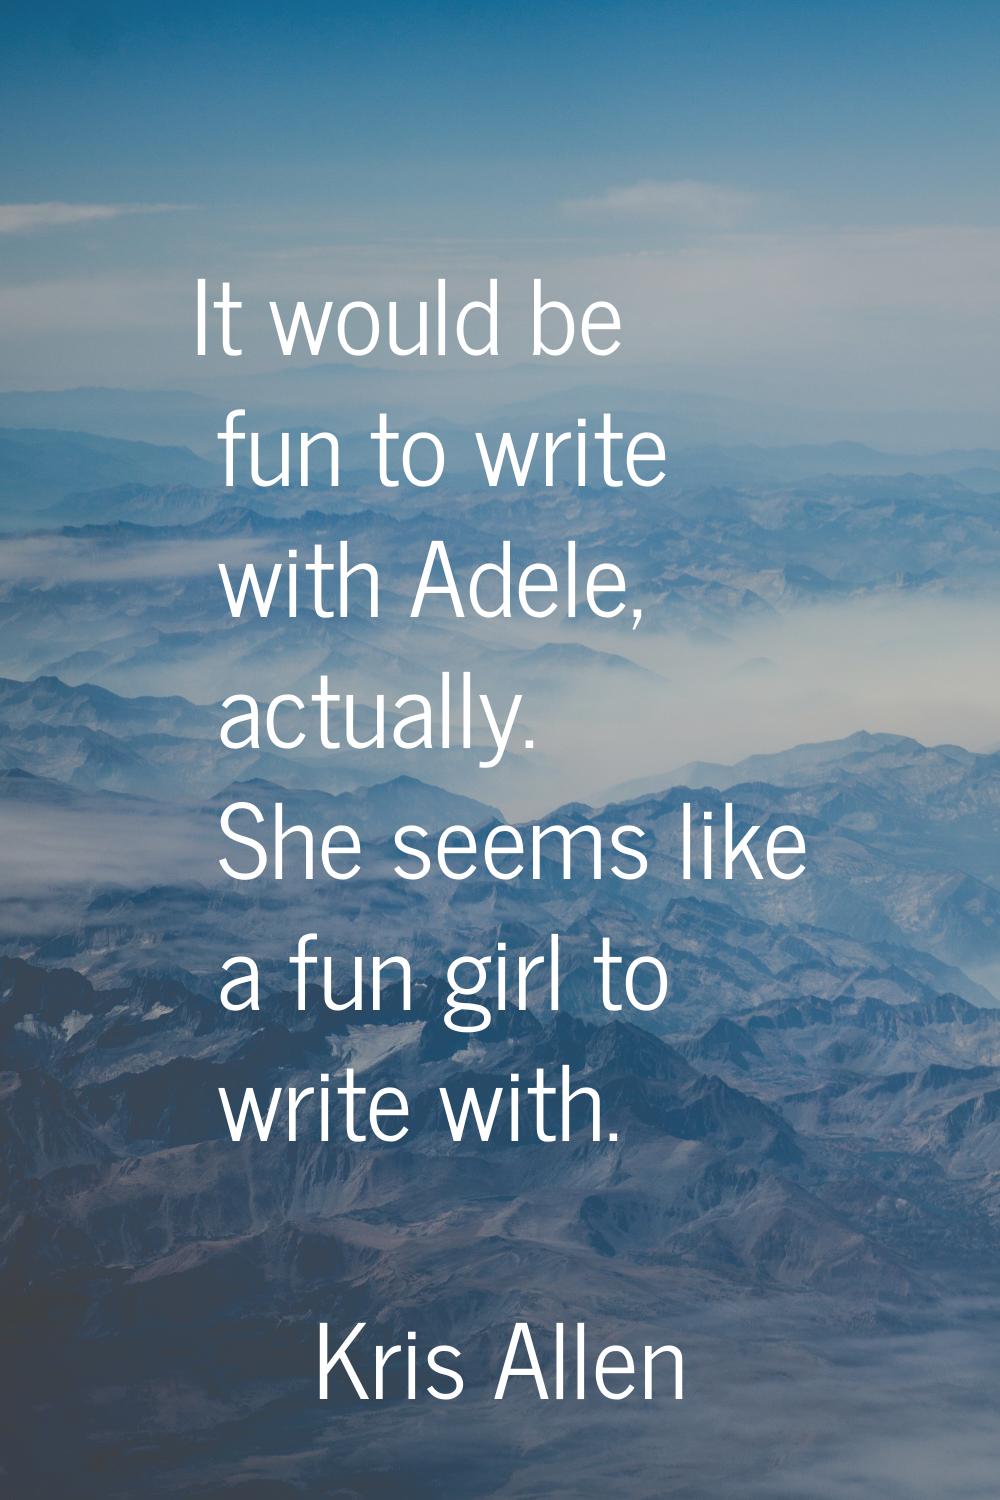 It would be fun to write with Adele, actually. She seems like a fun girl to write with.